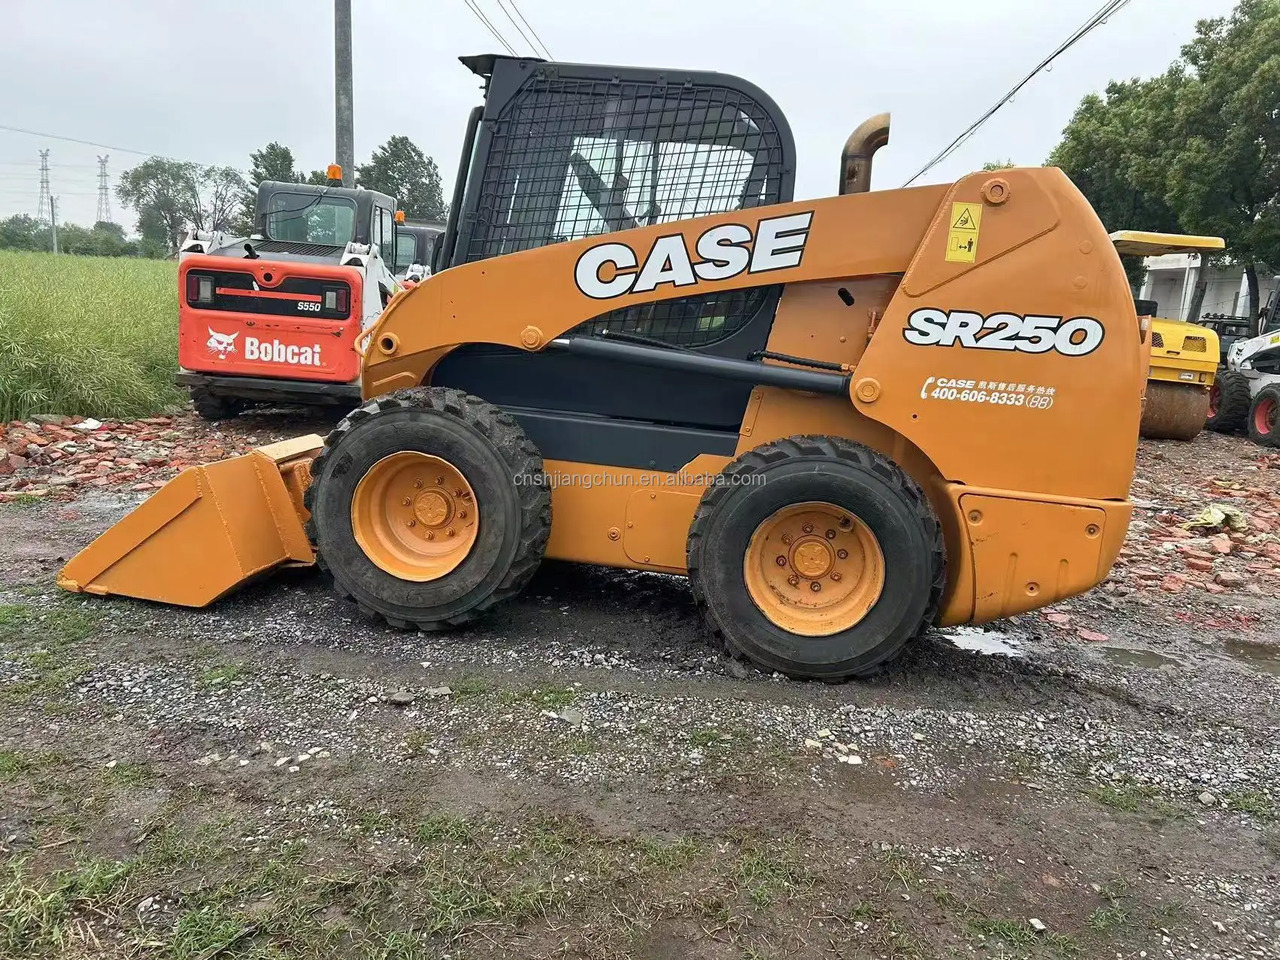 Mini chargeuse Used Skid Steer loader Case 250 in good condition for sale: photos 4